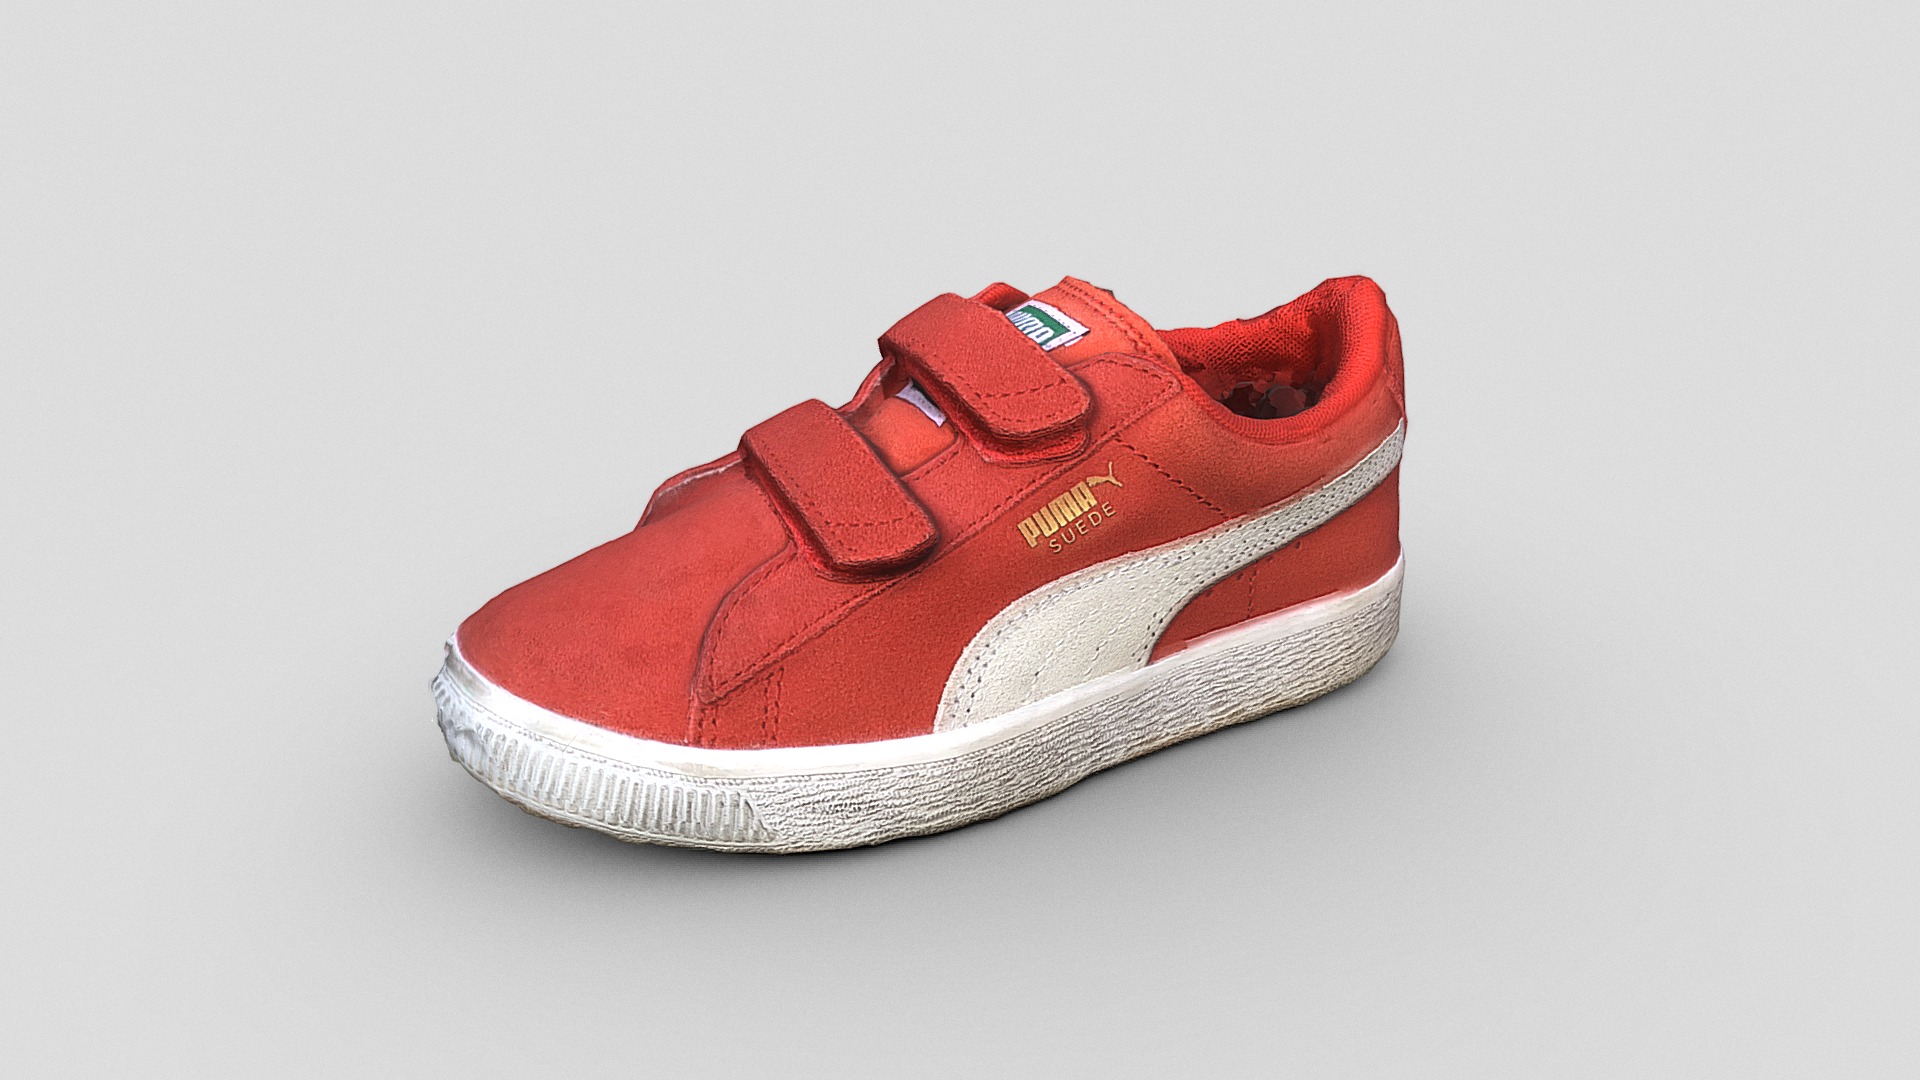 3D model William’s Puma sneakers - This is a 3D model of the William's Puma sneakers. The 3D model is about a red and white shoe.